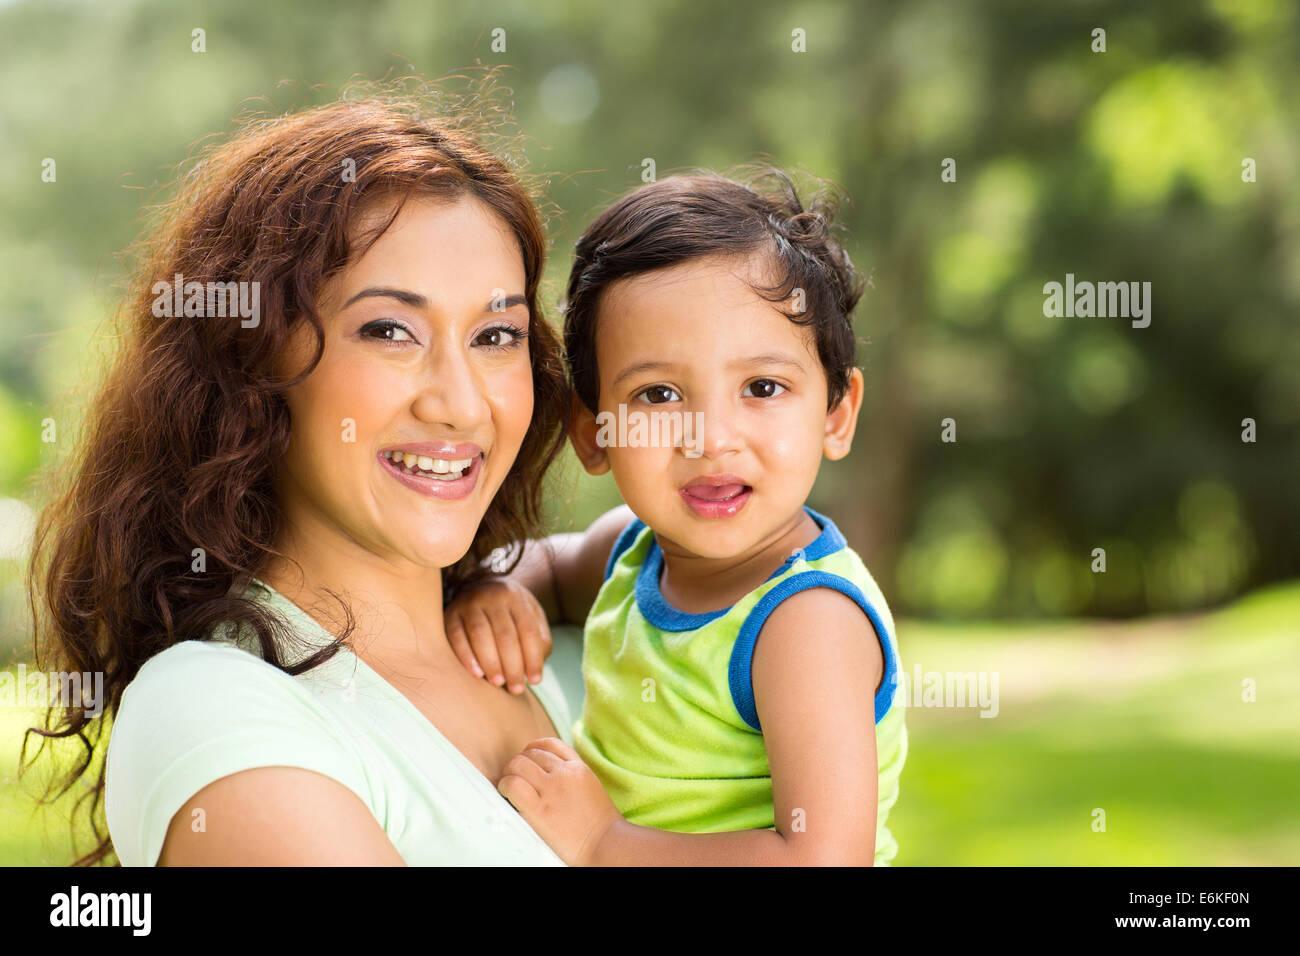 portrait of happy young Indian mother and baby boy outdoors Stock Photo